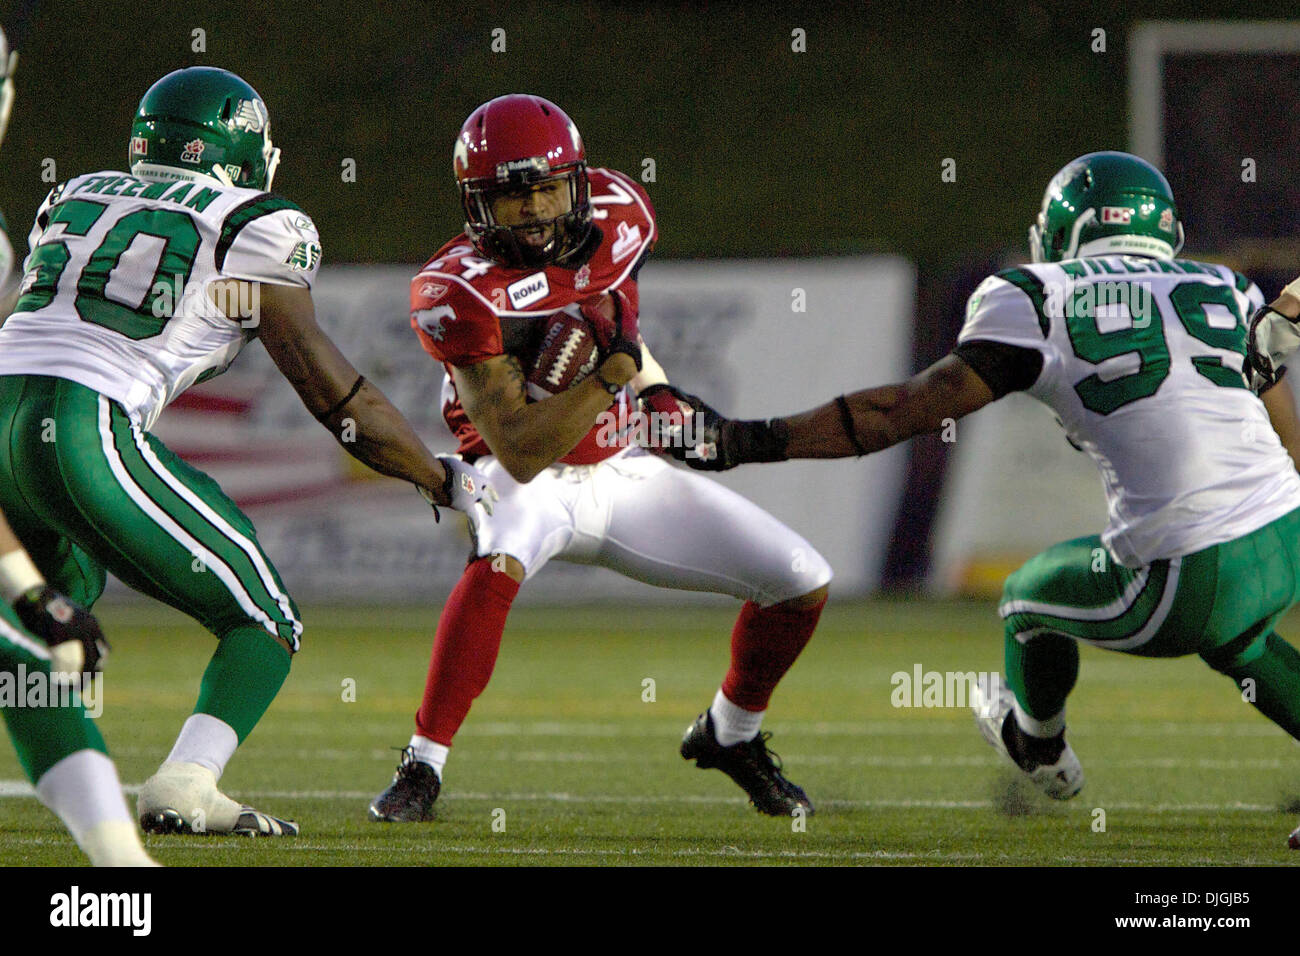 July 24, 2010 - Calgary, Alberta, Canada - 24 July 2010: Calgary Stampeders receiver Deon Murphy (24) attempts to get past Saskatchewan Roughriders linebacker Jerrell Freeman (50) and defensive end Shomari Williams (99) during a game against the Calgary Stampeders at McMahon Stadium in Calgary, Alberta.  The Calgary Stampeders defeated the Saskatchewan Roughriders 40 to 20..Mandato Stock Photo